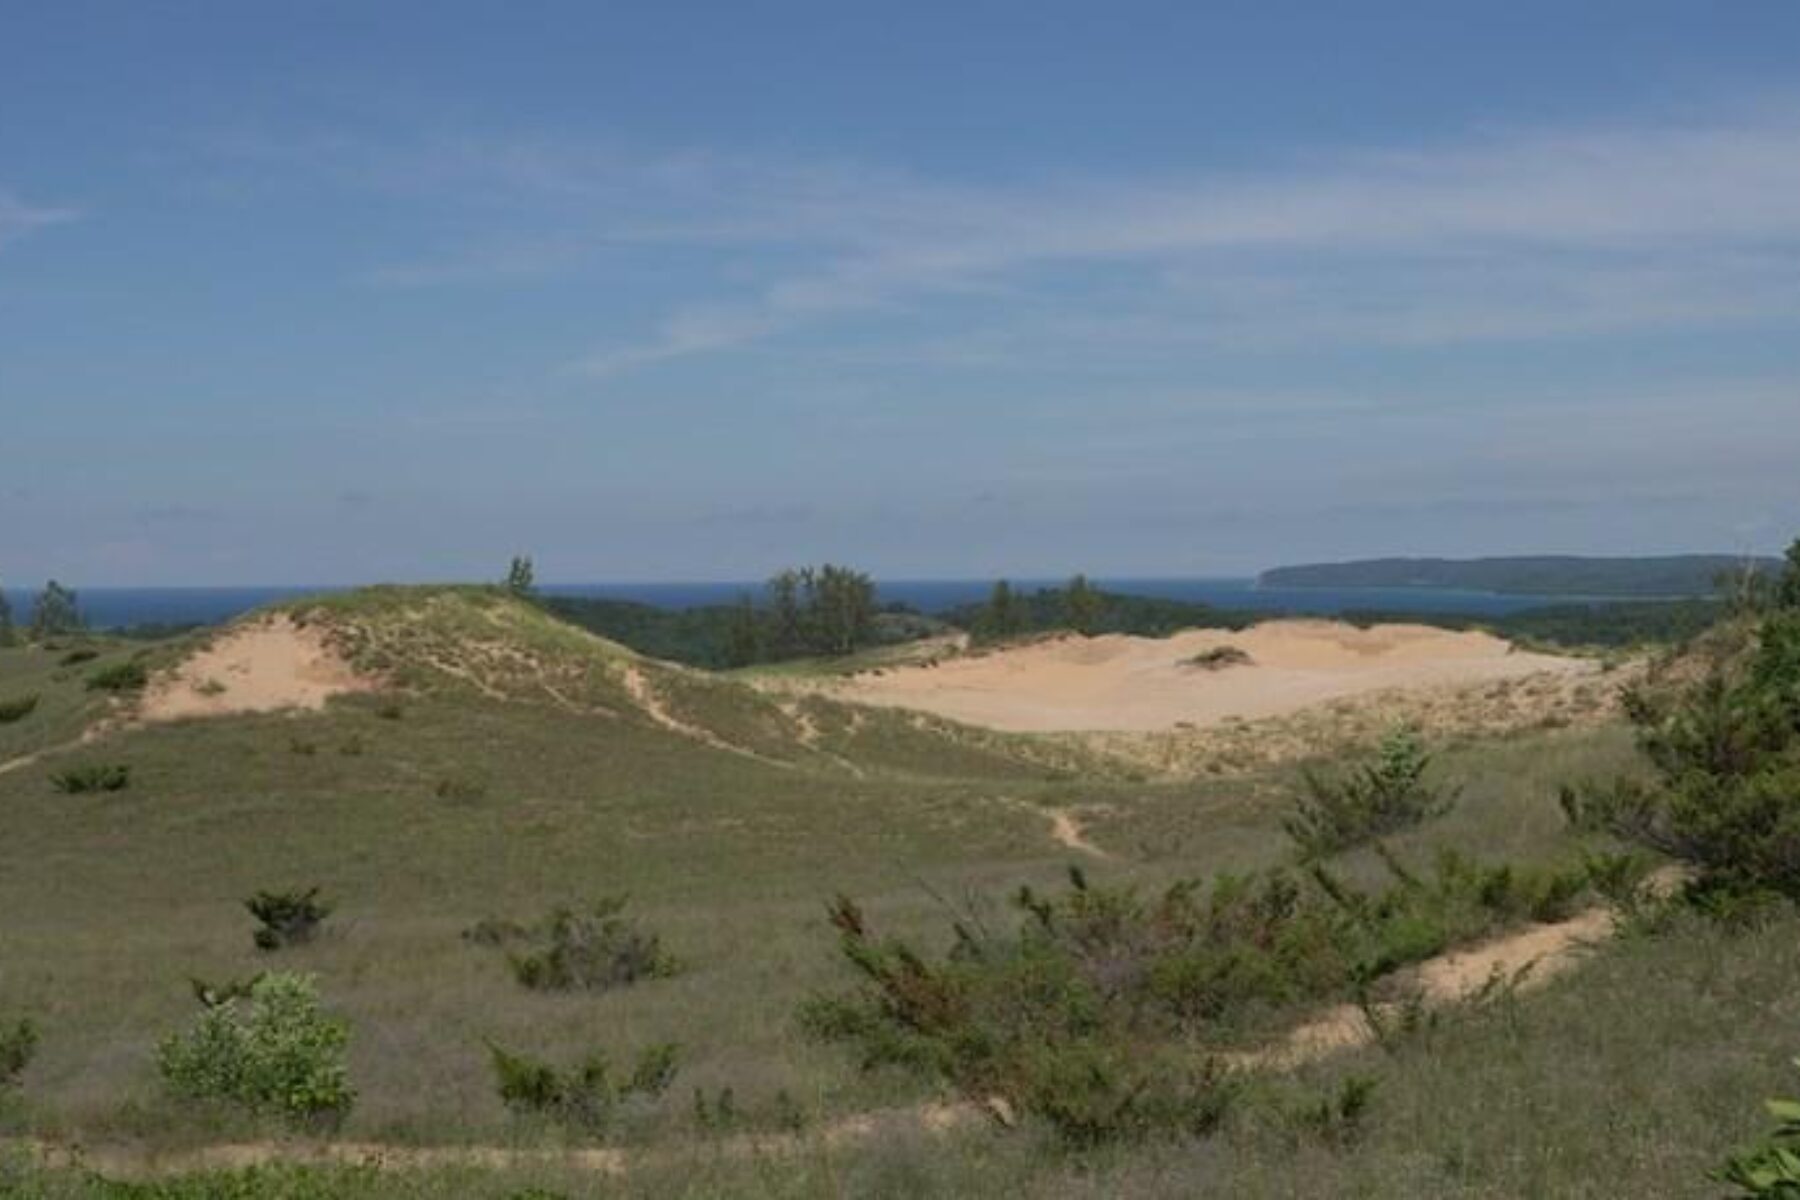 Dunes on the Pierre Stocking Scenic Drive Overlook | Photo by Robert Annis